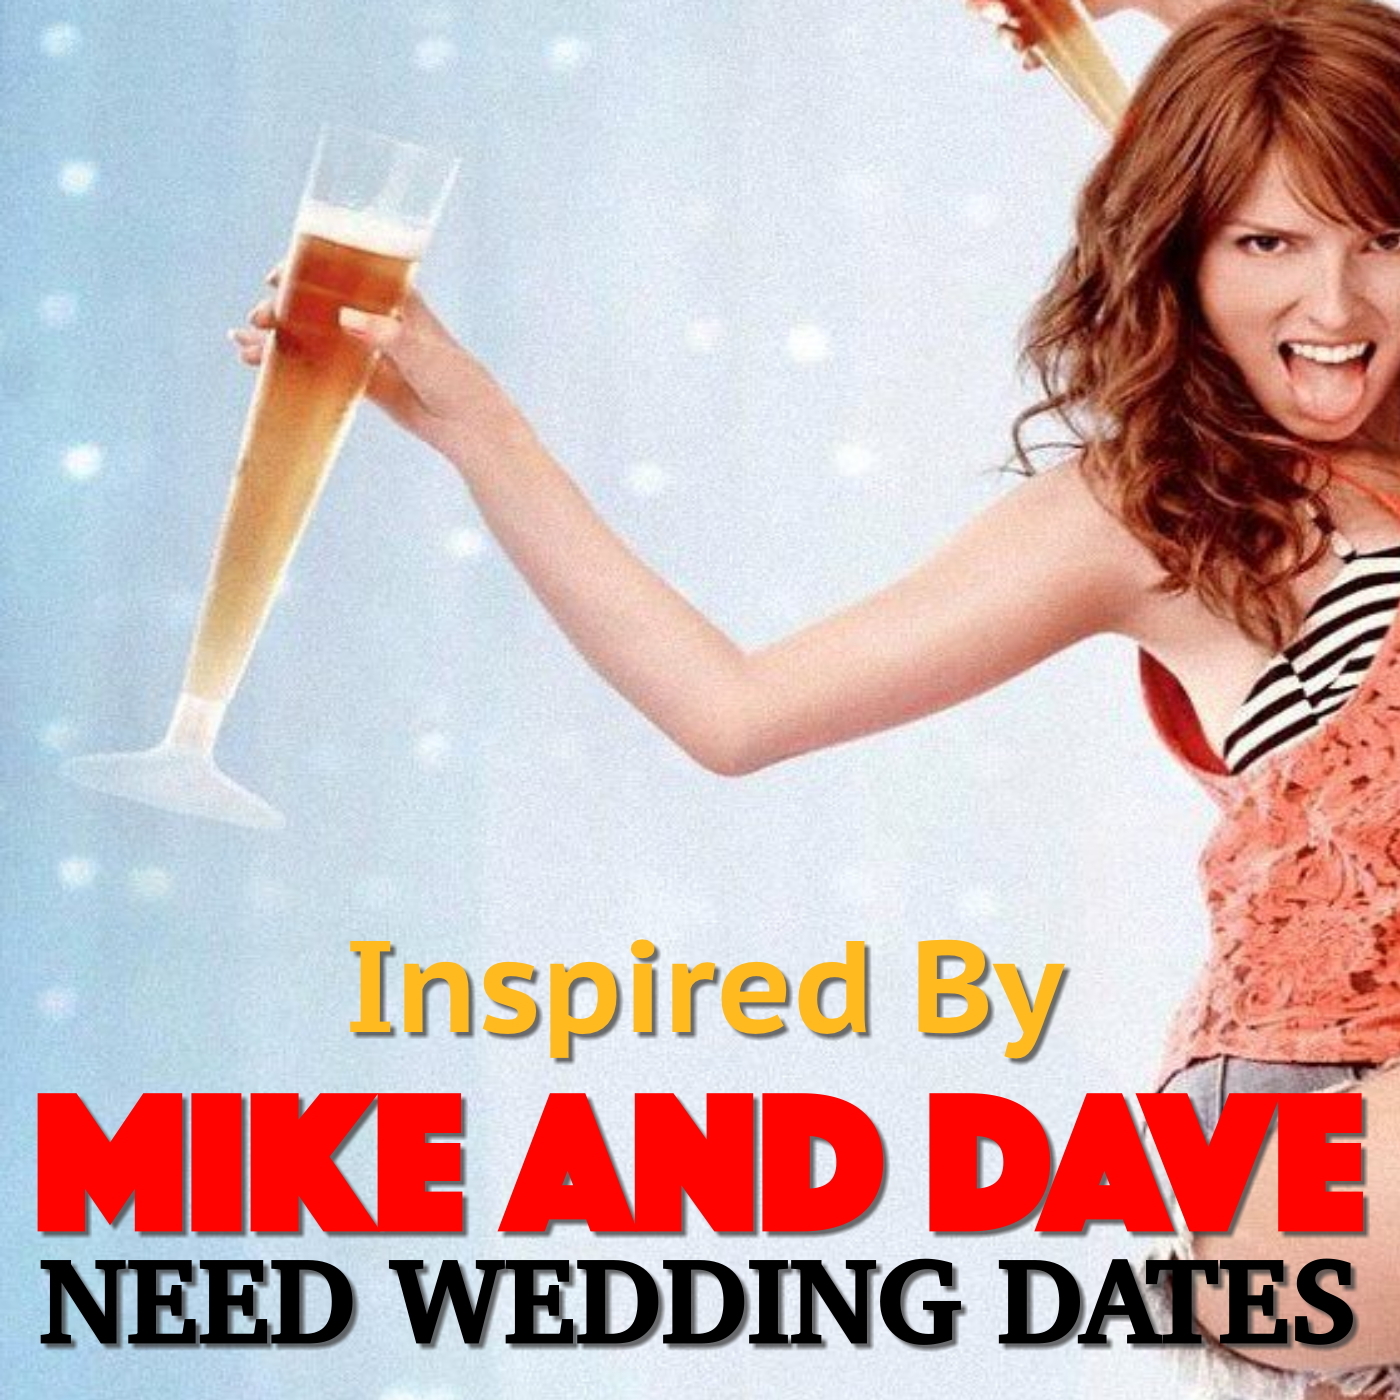 Inspired By 'Mike And Dave Need Wedding Dates'